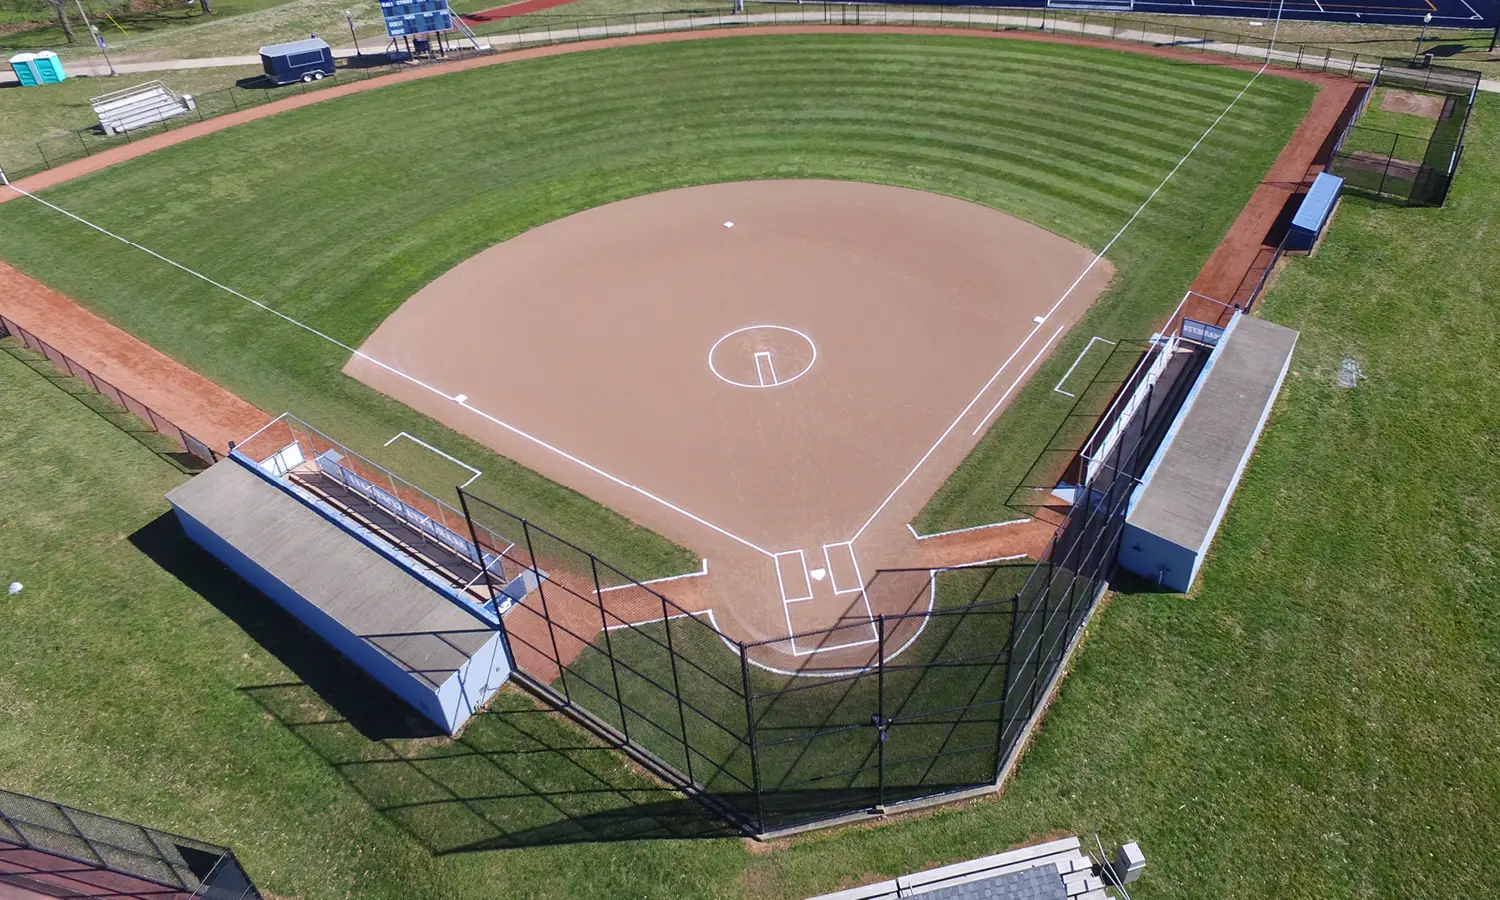 Softball Field Dimensions - An indepth analysis